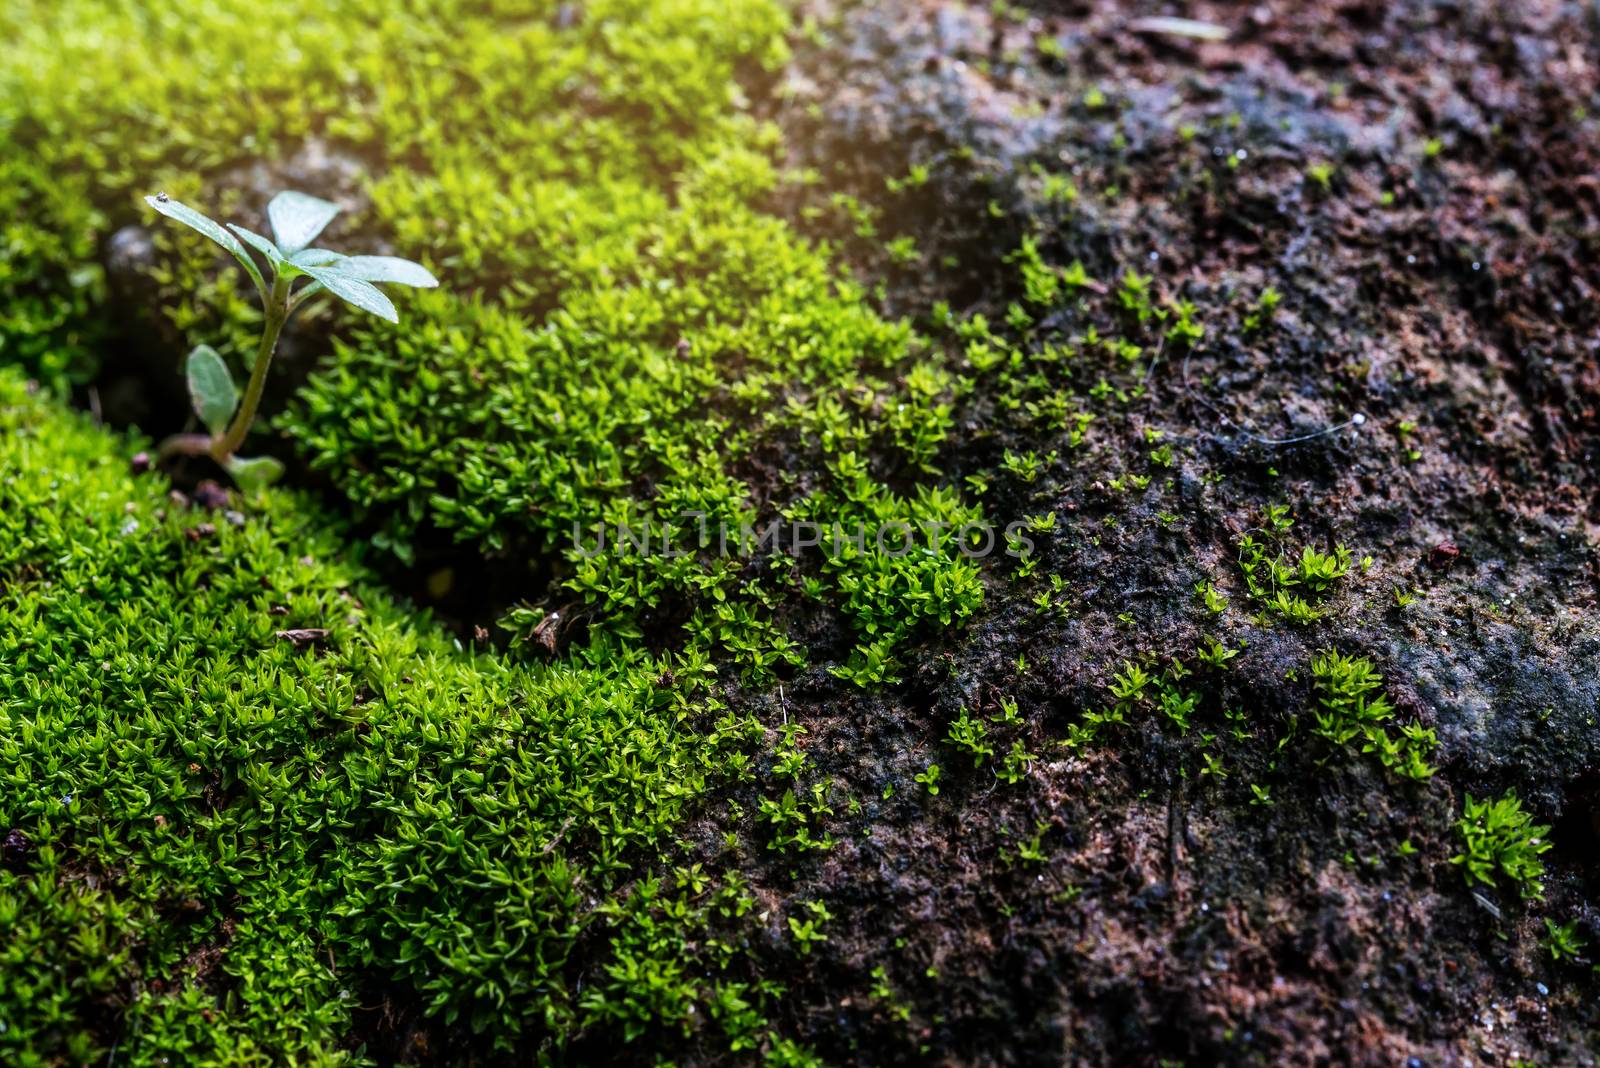 Close Up : Green moss on concrete floor background texture with selective focus, Image filter effect.